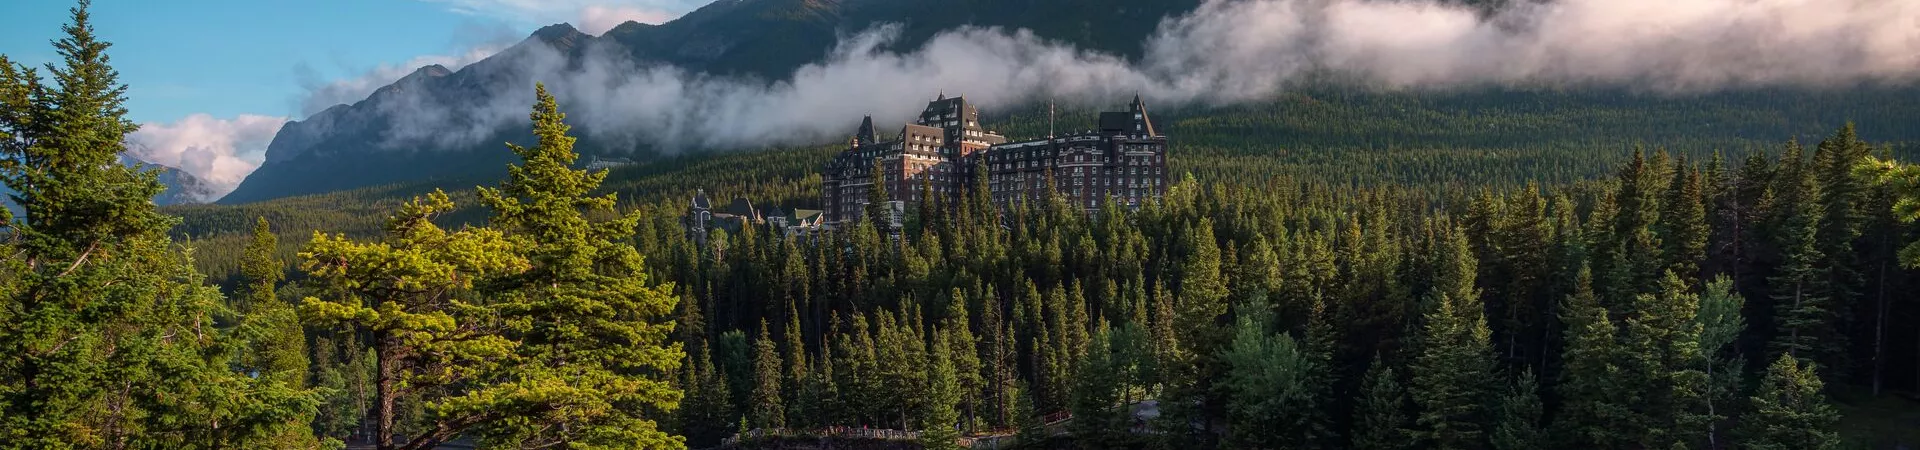 Fairmont Spring Hotel amongst the trees of Banff National Park, Canada